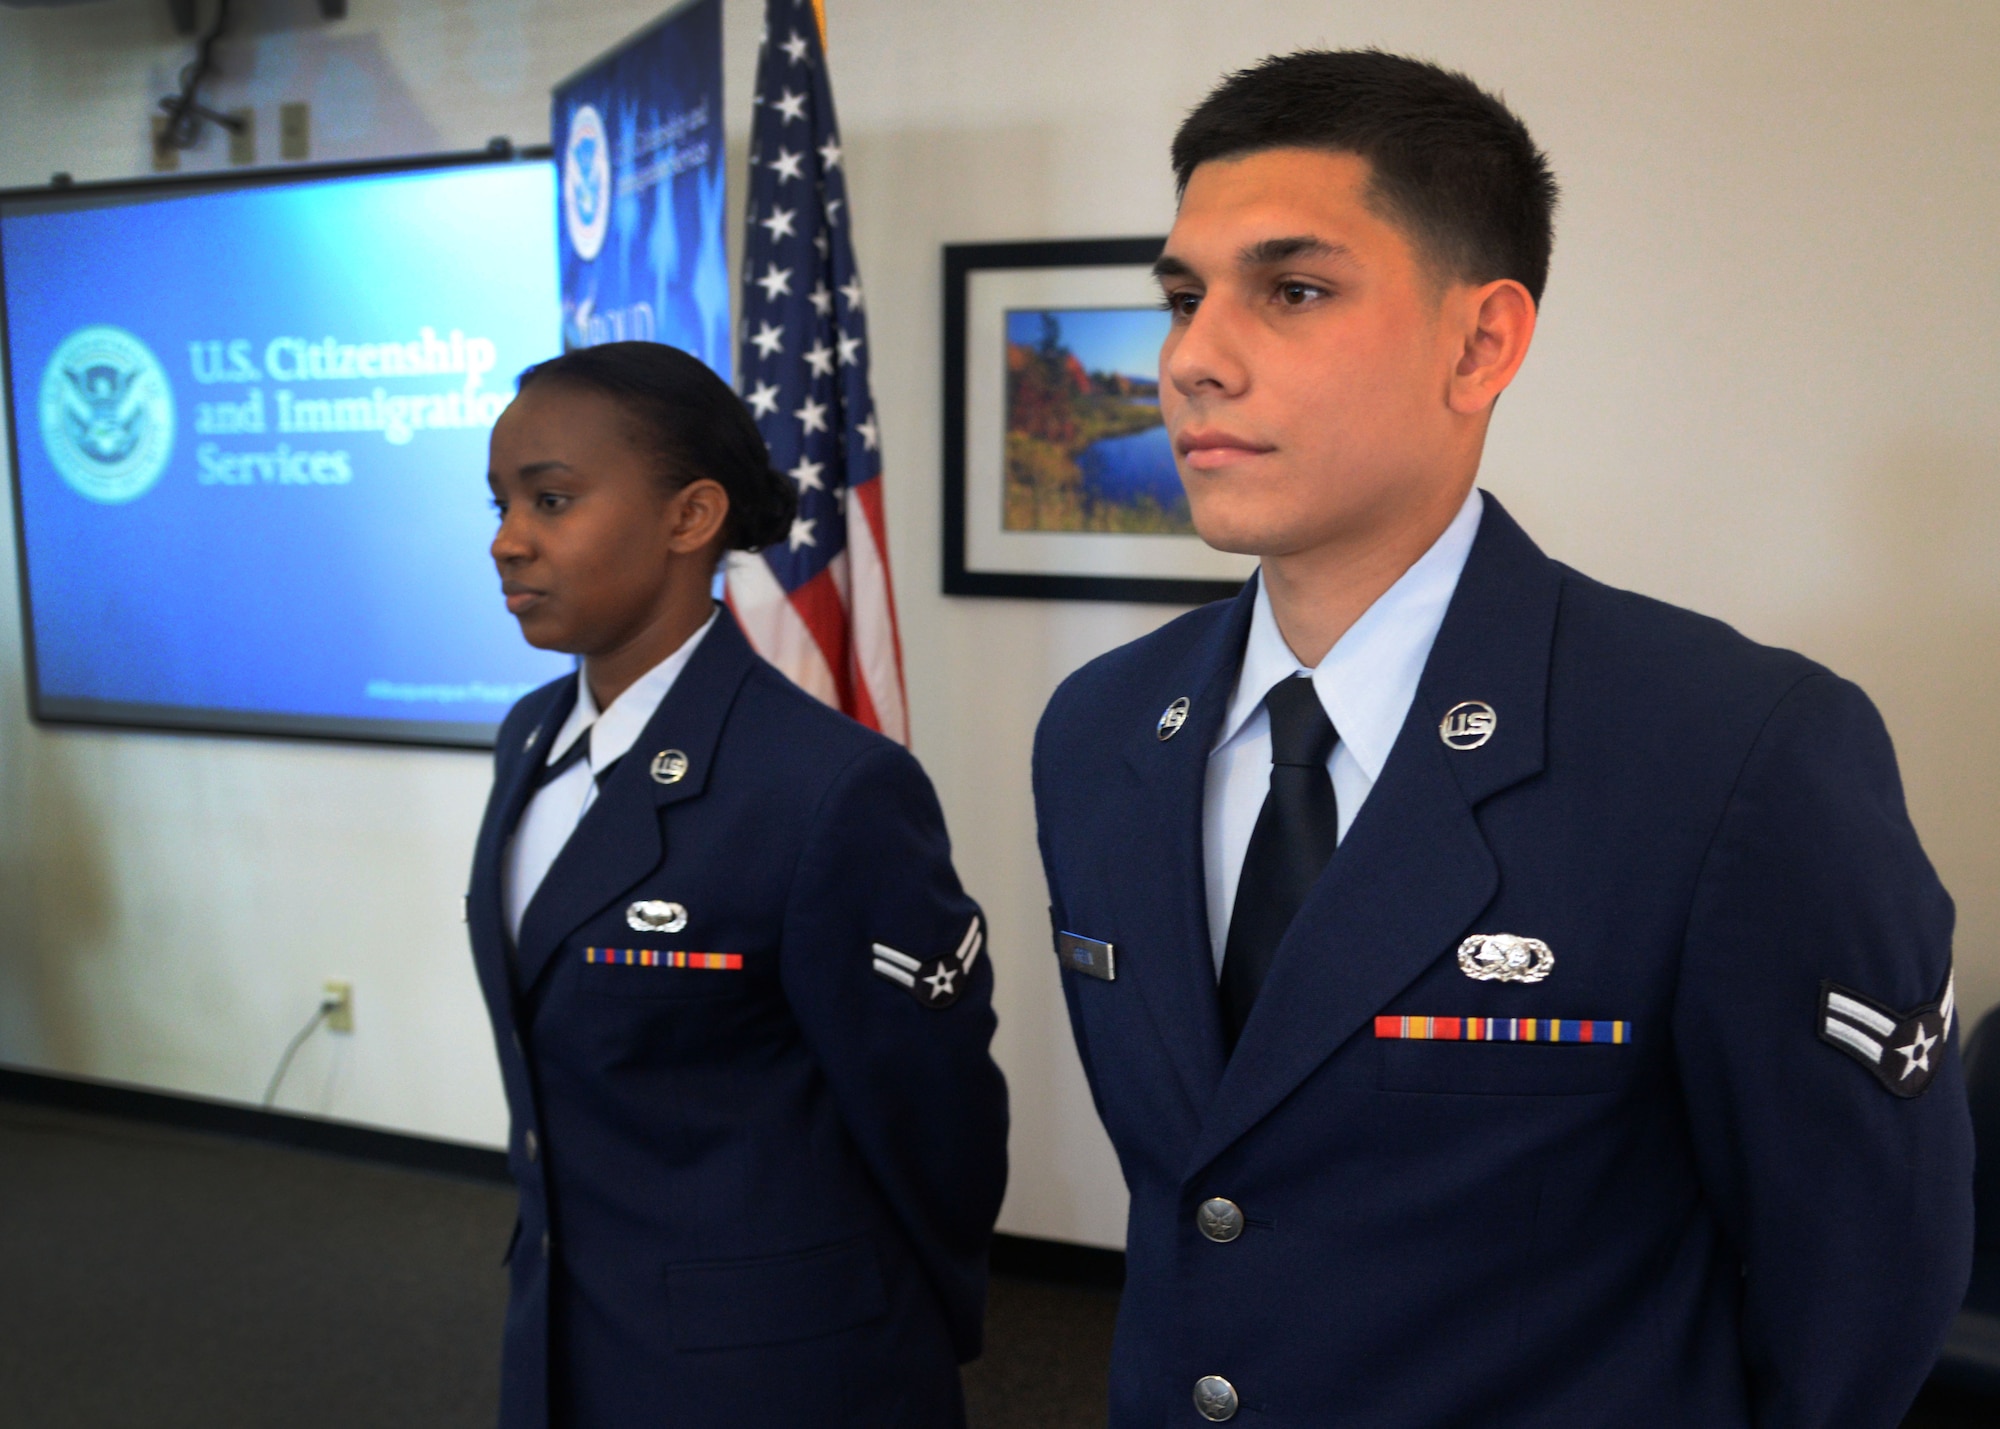 U.S. Air Force Airman 1st Class Dominik Green, 27th Special Operations Logistics Readiness Squadron storage and issue specialist, and Airman 1st Class Rehema Mburugu, 27th Special Operations Contracting Squadron contract specialist, proudly stand in front of a room full of family and friends prior to a naturalization ceremony March 20, 2015 at Cannon Air Force Base, N.M. Green was born in Mannheim, Germany, Mburugu in Kenya, and were two of four presented with their citizenship after working several months with the United States Citizenship and Immigration Services field office in Albuquerque, New Mexico. (U.S. Air Force photo/Staff Sgt. Alex Mercer) 

